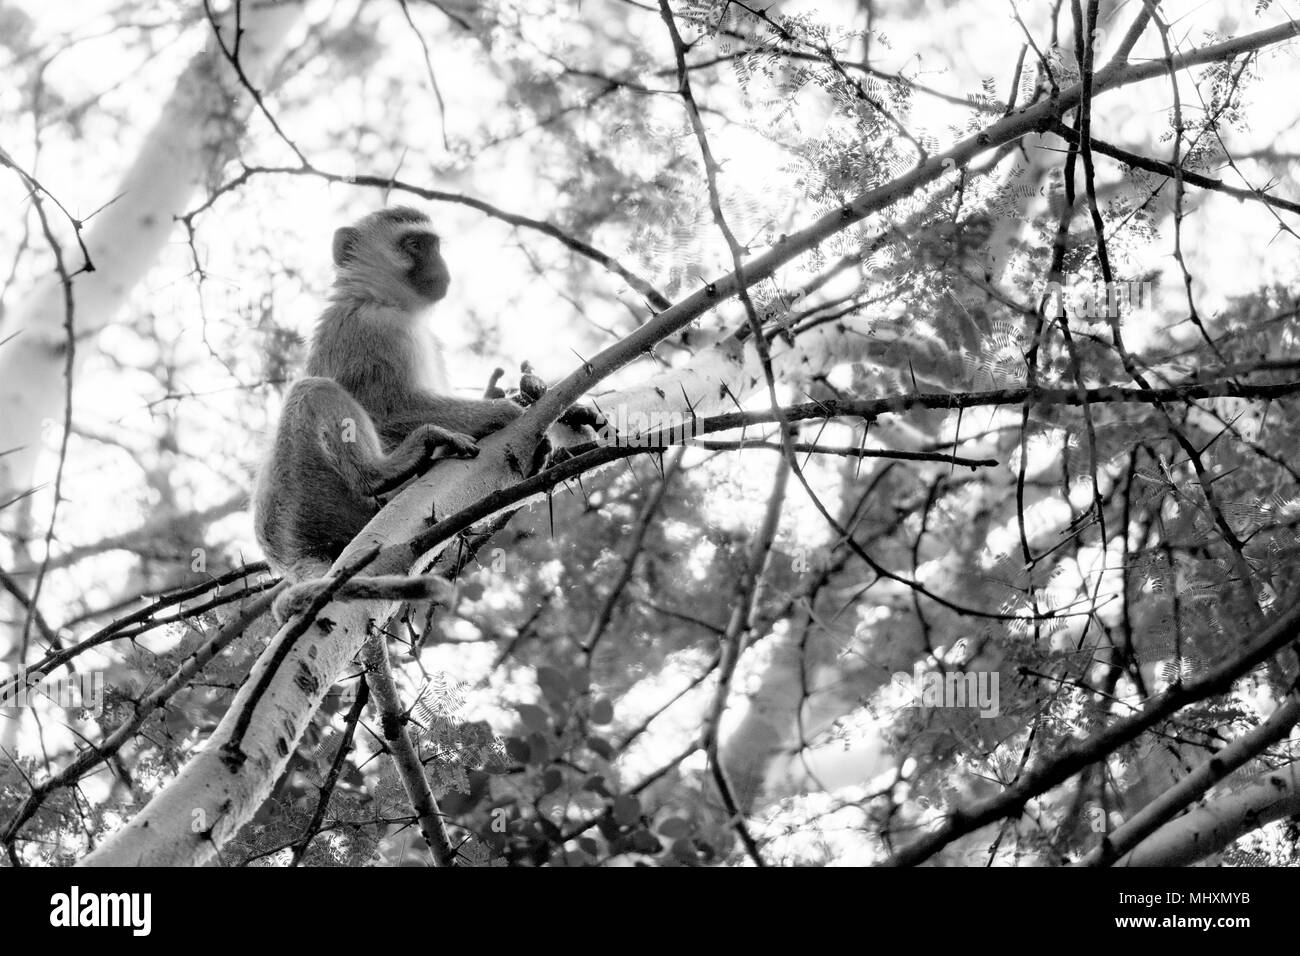 monkey sitting in branches in black and white Stock Photo